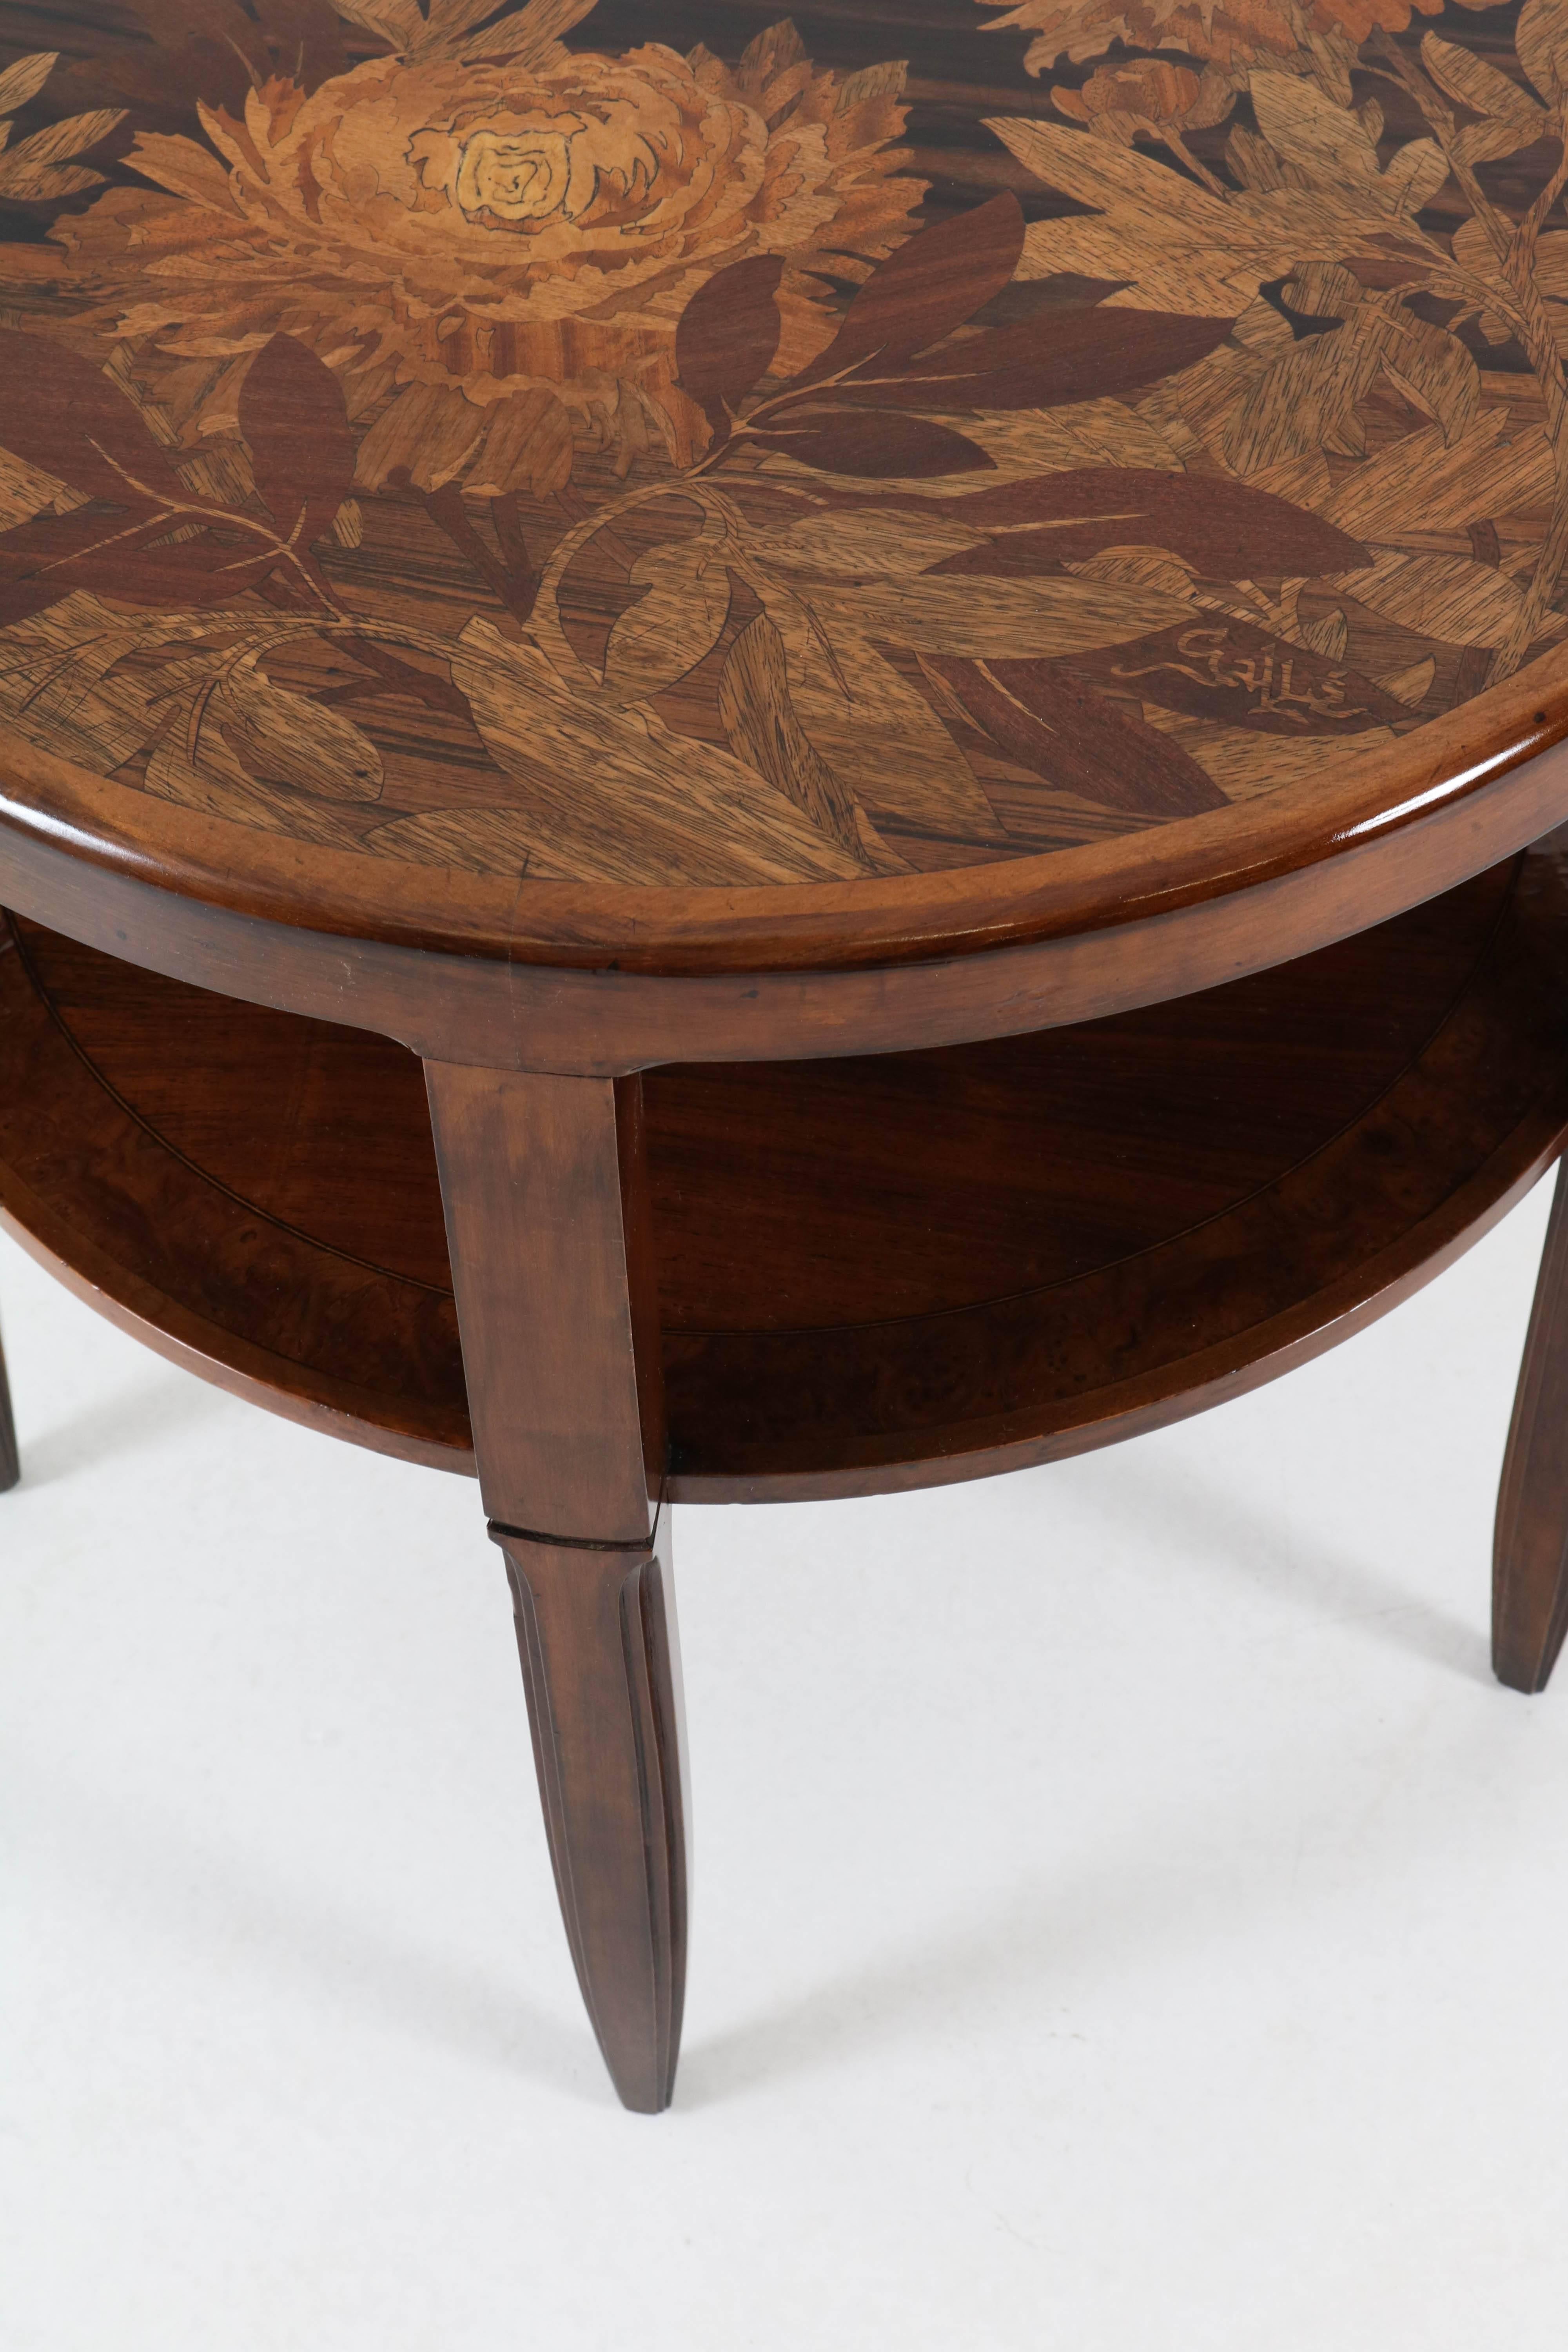 Early 20th Century Walnut and Macassar French Art Nouveau Marquetry Table by Emile Gallé, 1900s